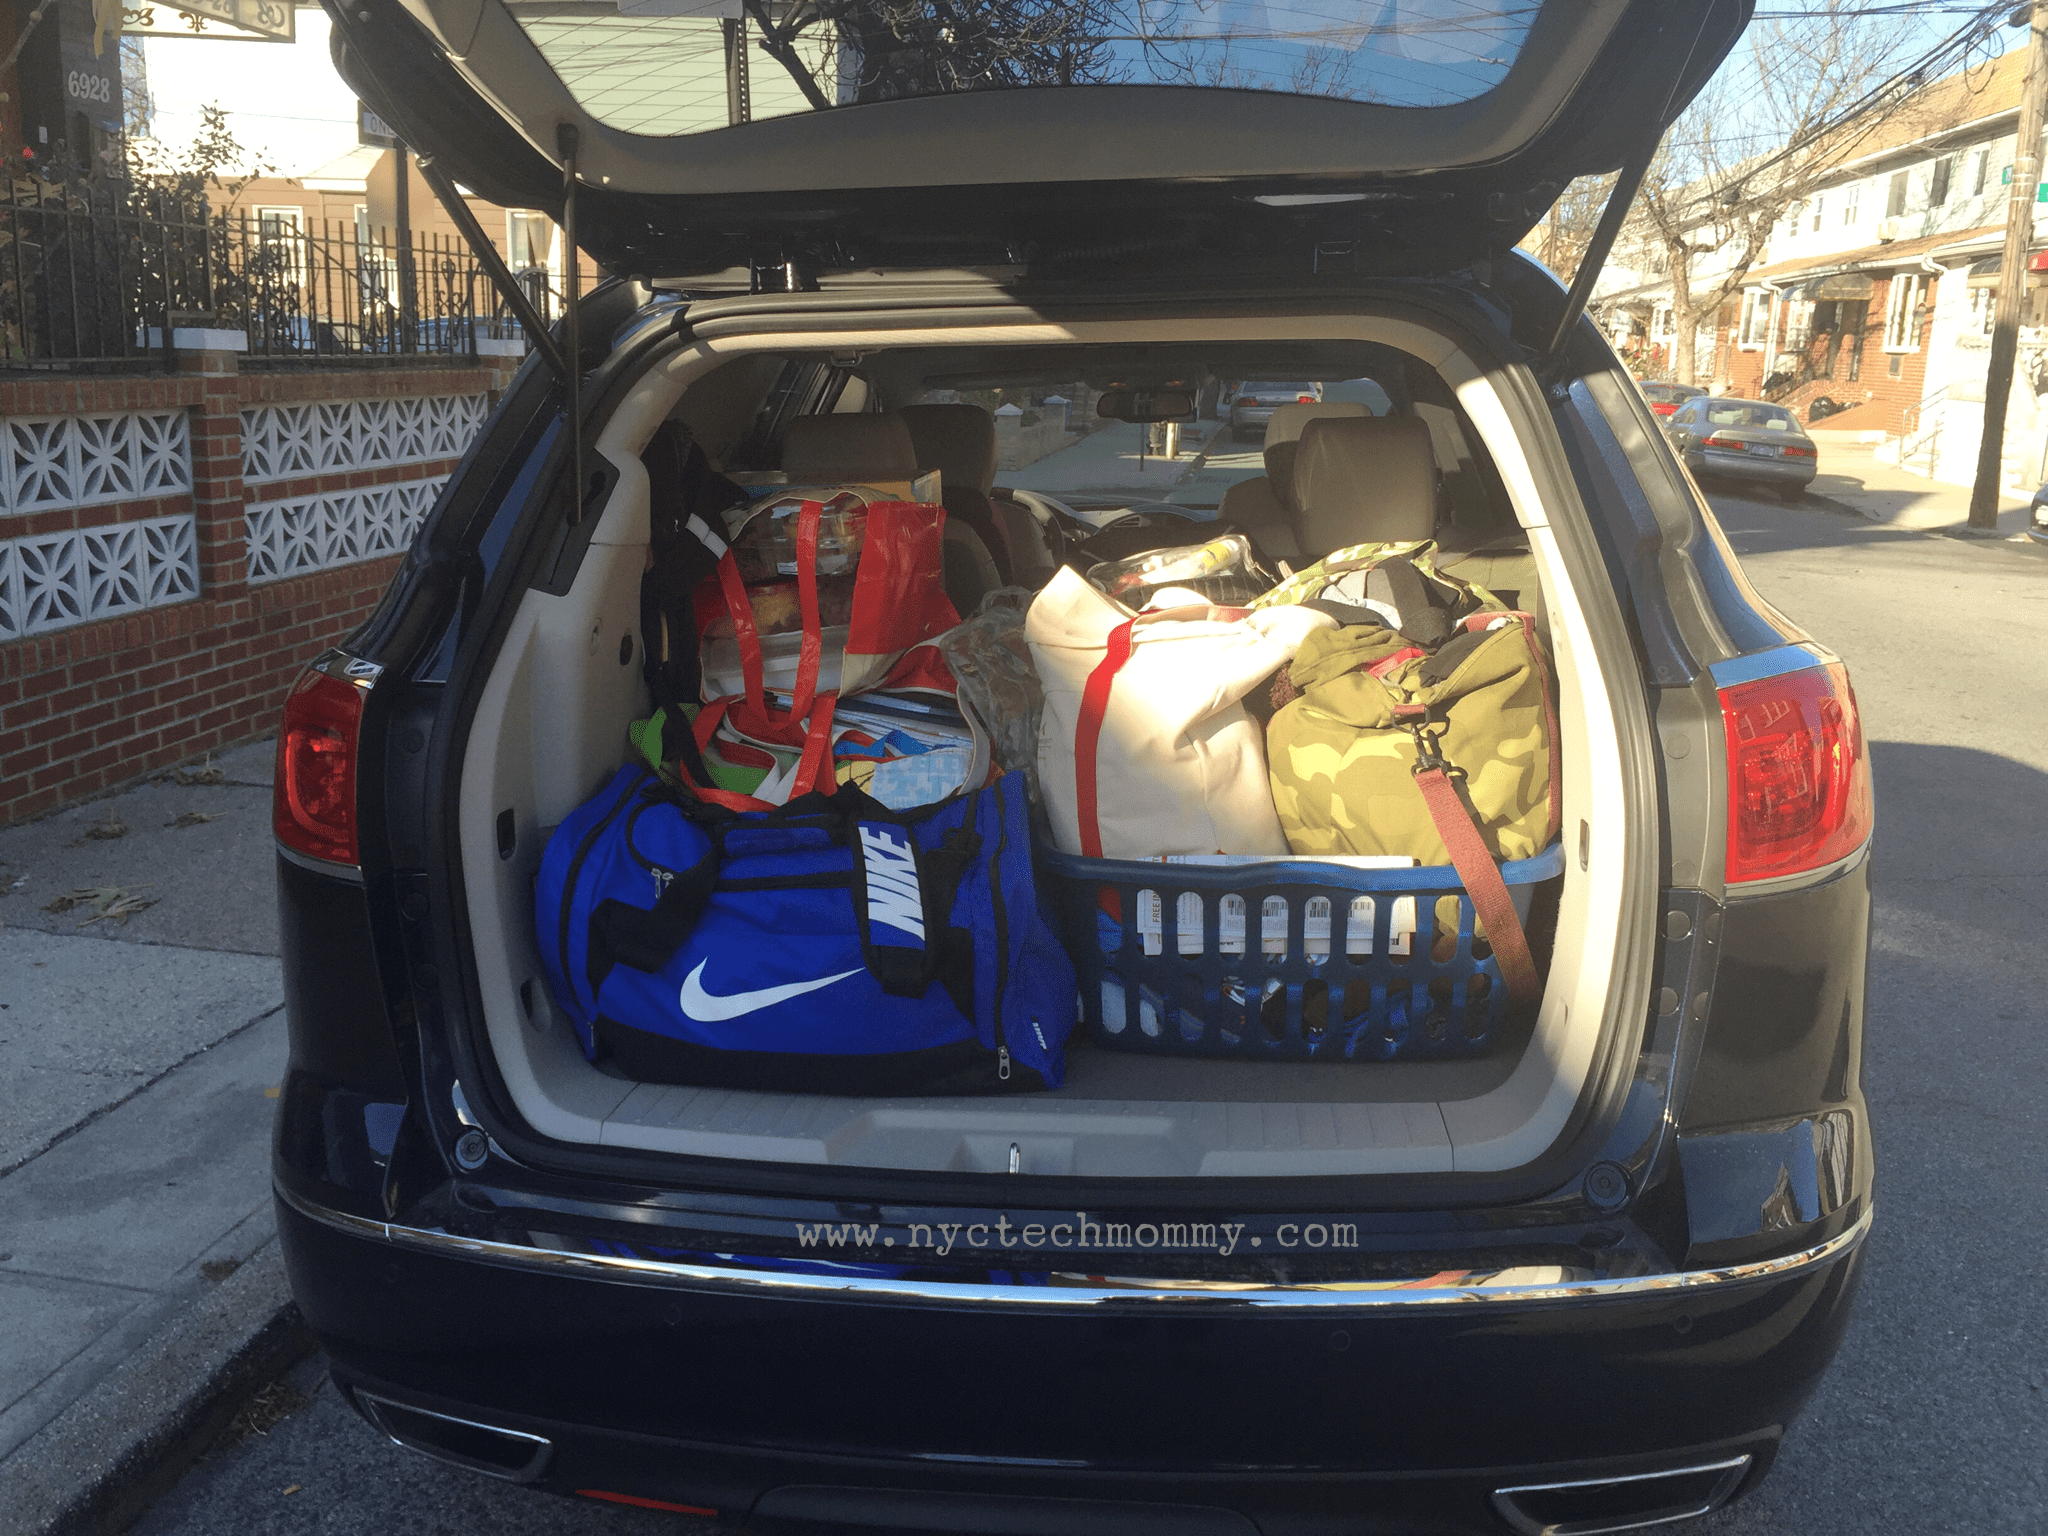 2016 Buick Enclave - Great trunk space to fit it ALL in when taking a family road trip 